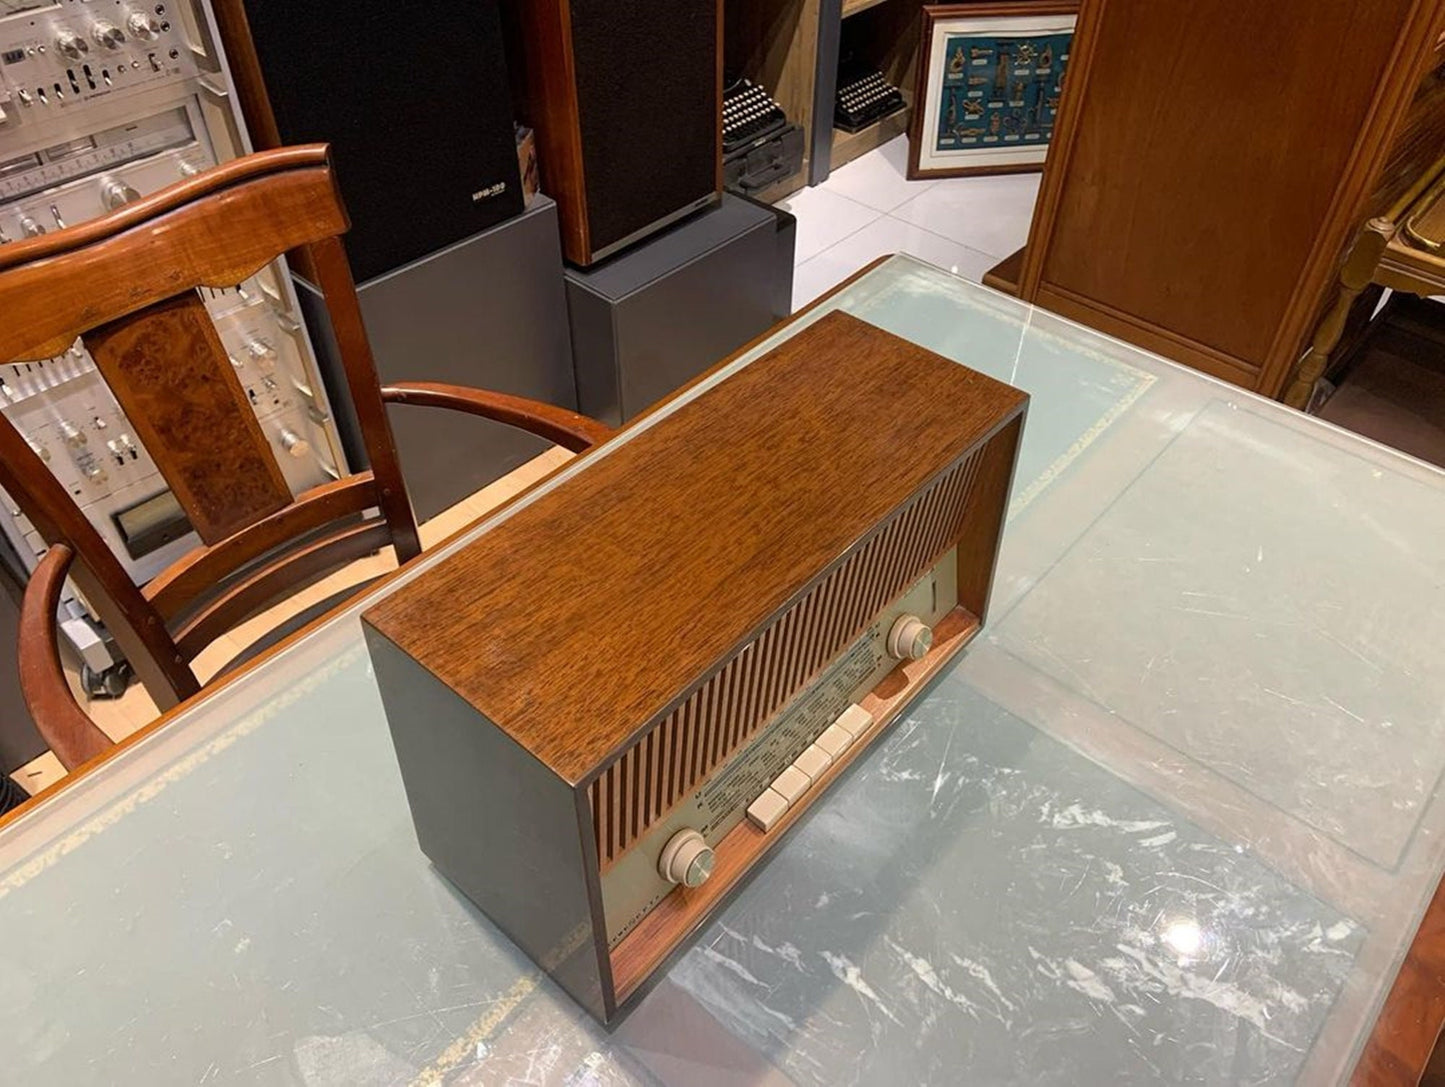 Loewe Opta Truxa Vintage Radio: A Symphony of Nostalgia and Modern Elegance with Antique Design and Lamp Feature